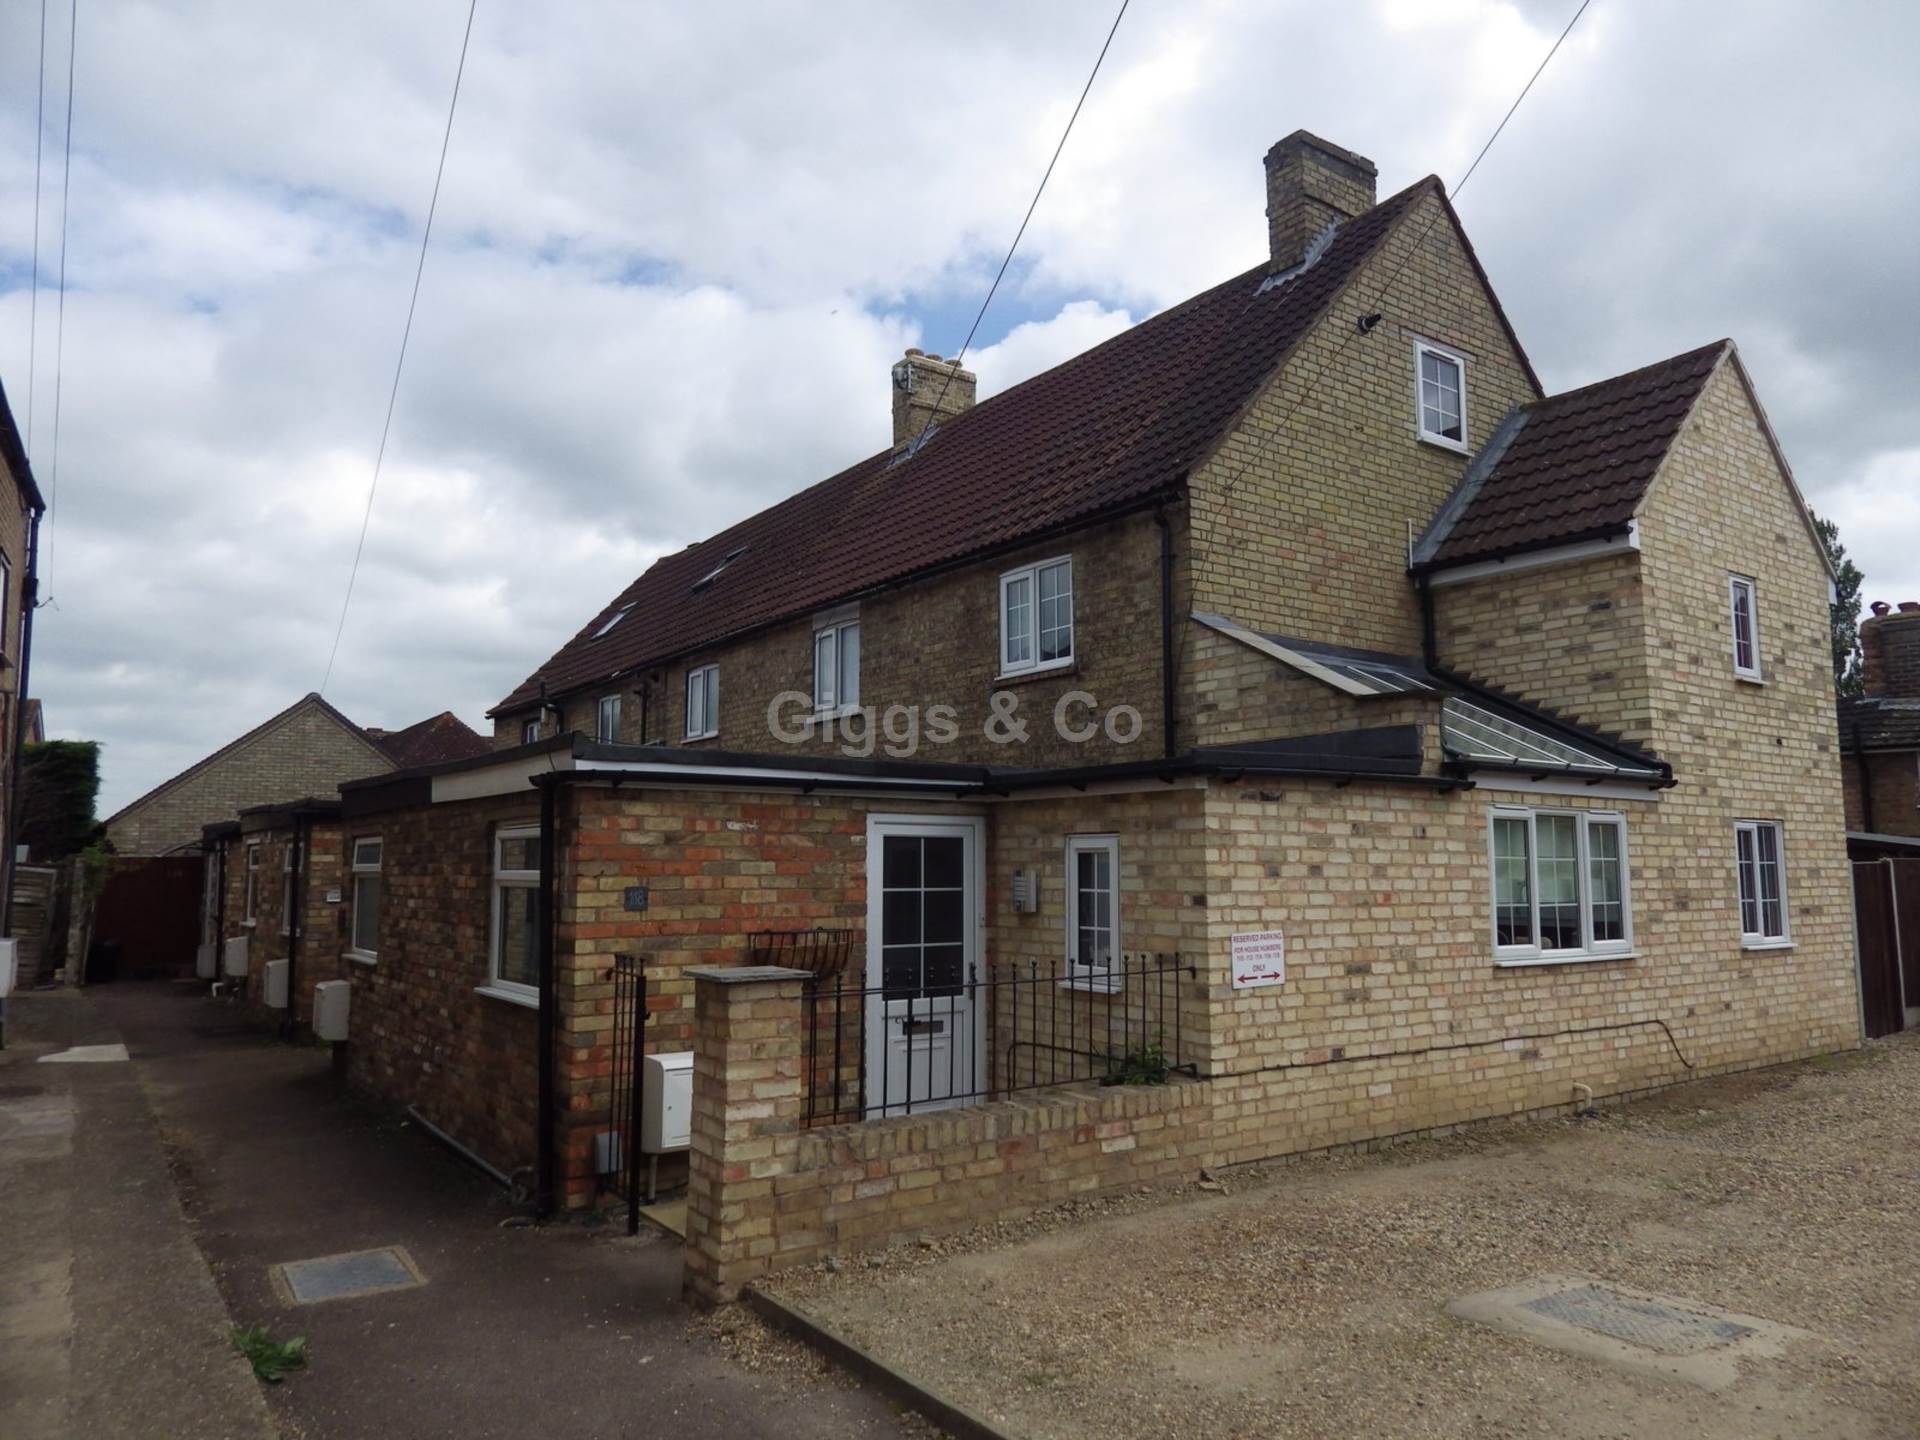 2 bed house to rent in Great North Road, Eaton Socon, St Neots, PE19